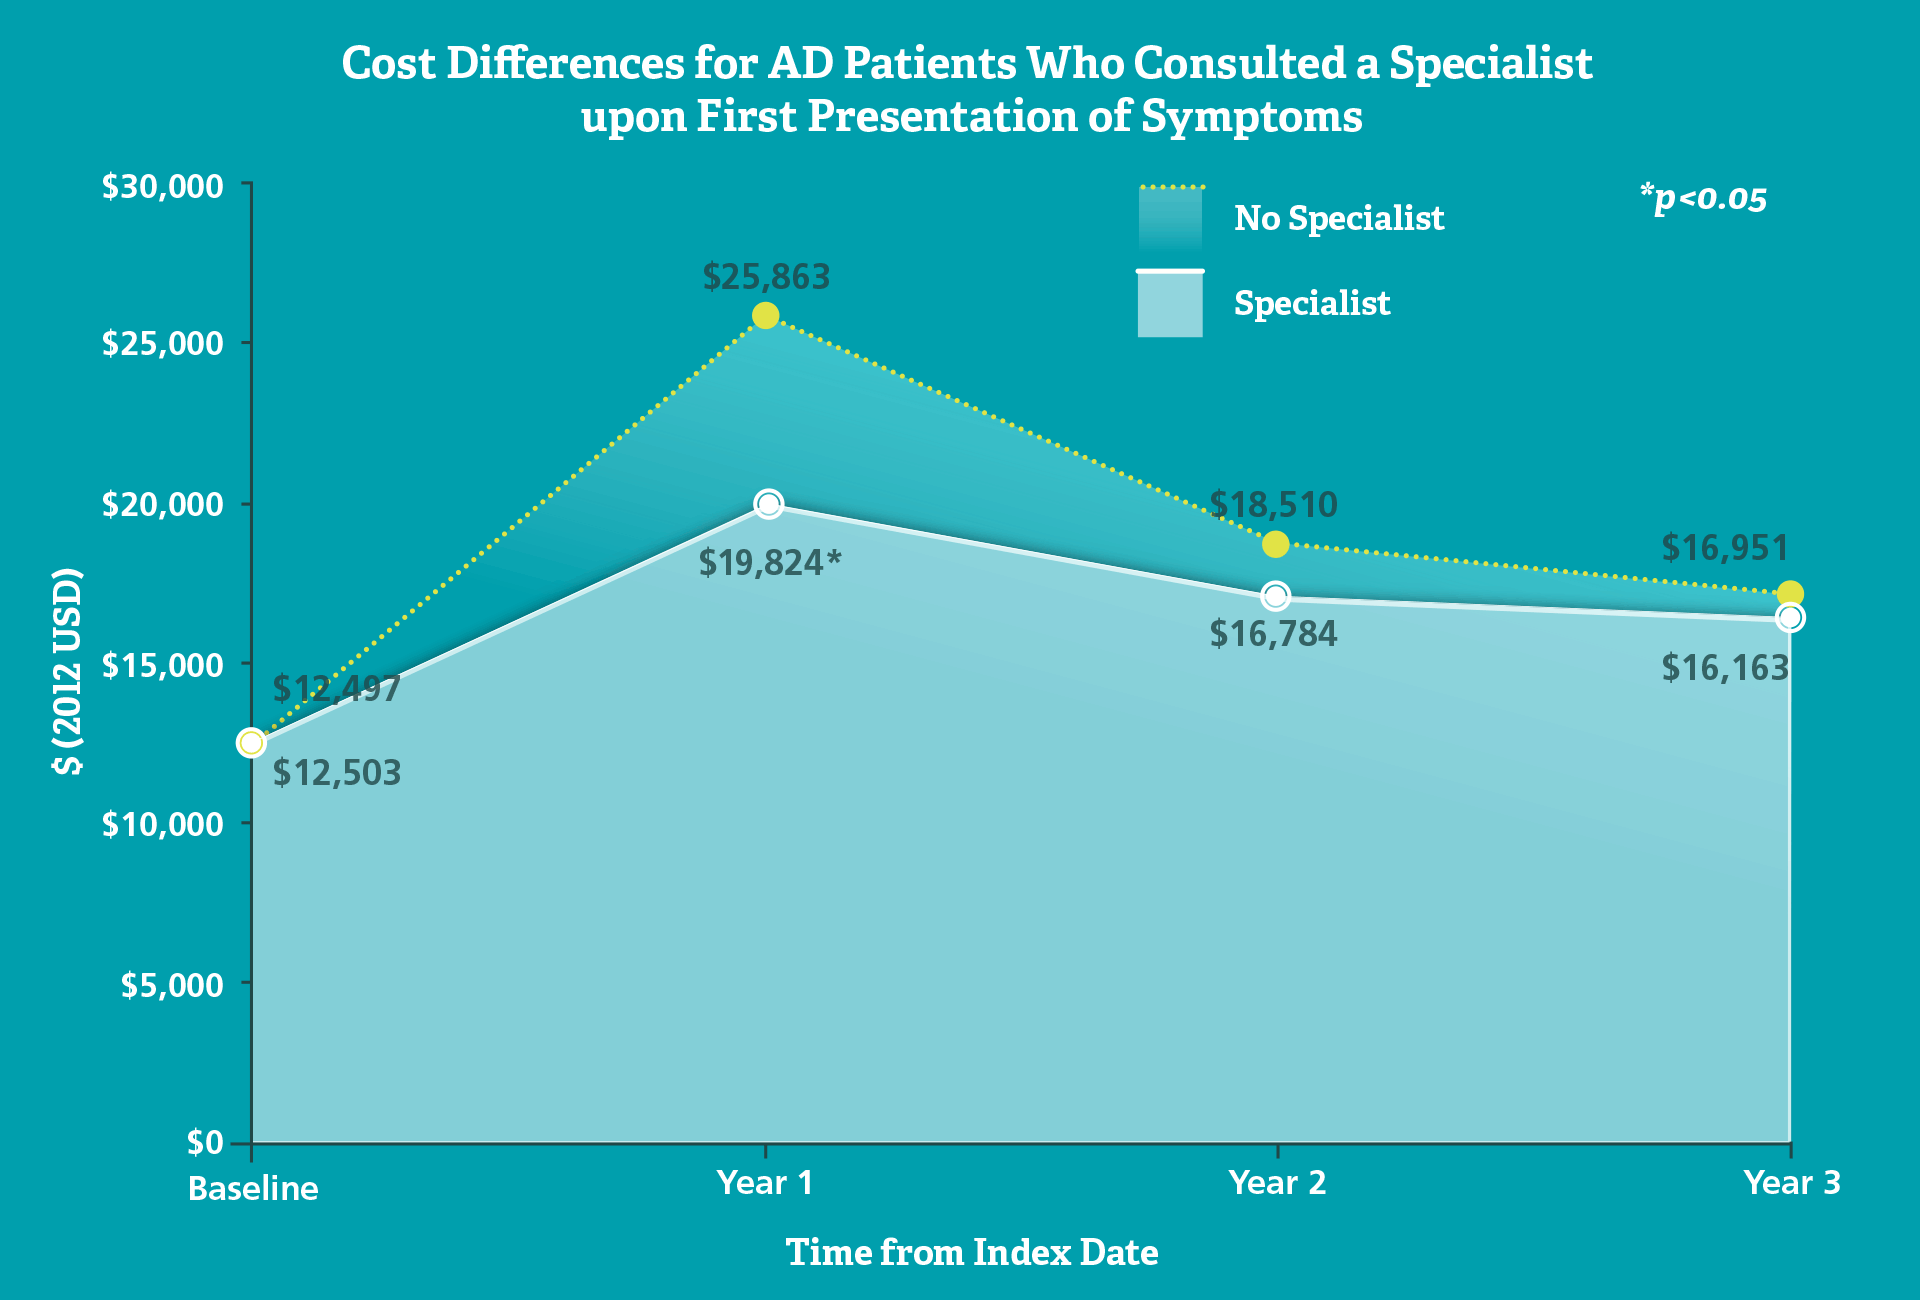 Cost Differences for AD Patients Who Consulted a Specialist upon First Presentation of Symptoms